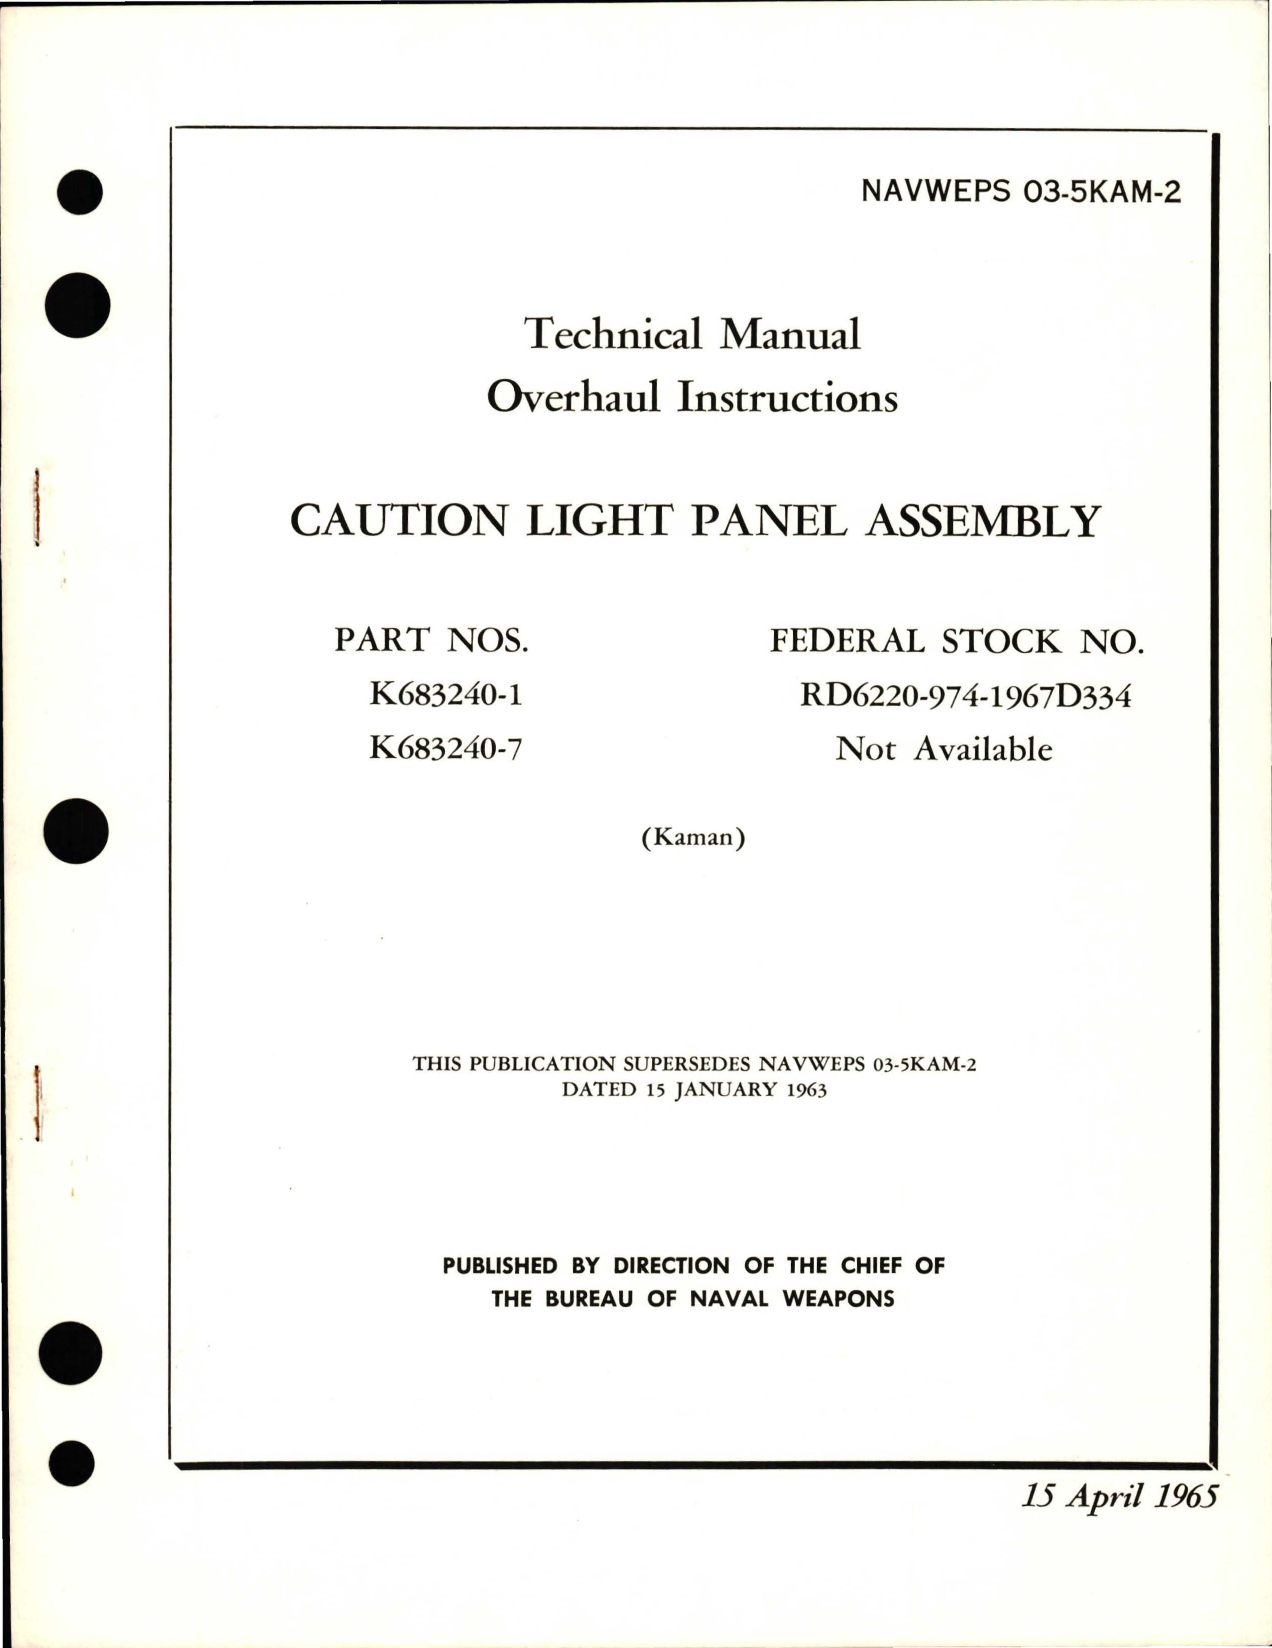 Sample page 1 from AirCorps Library document: Overhaul Instructions for Caution Light Panel Assembly - Parts K683240-1 and K683240-7